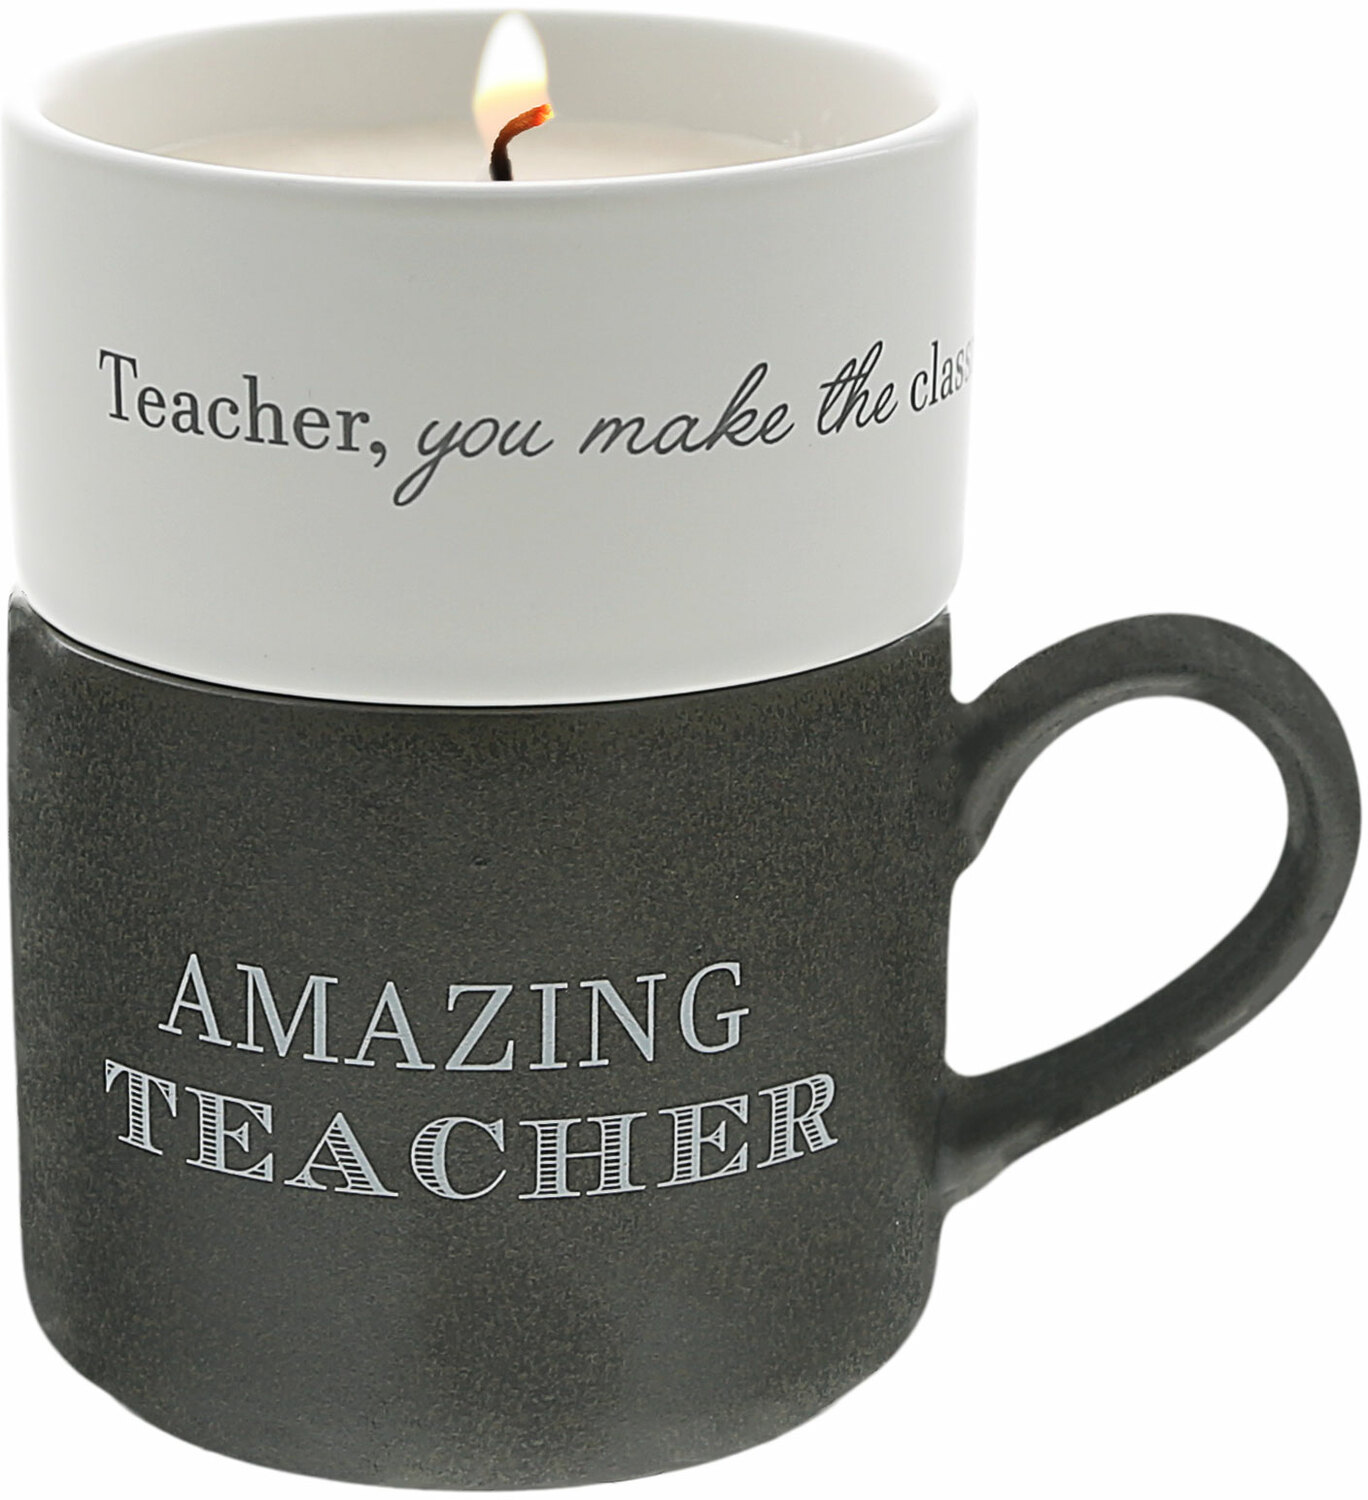 Teacher by Filled with Warmth - Teacher - Stacking Mug and Candle Set
100% Soy Wax Scent: Tranquility